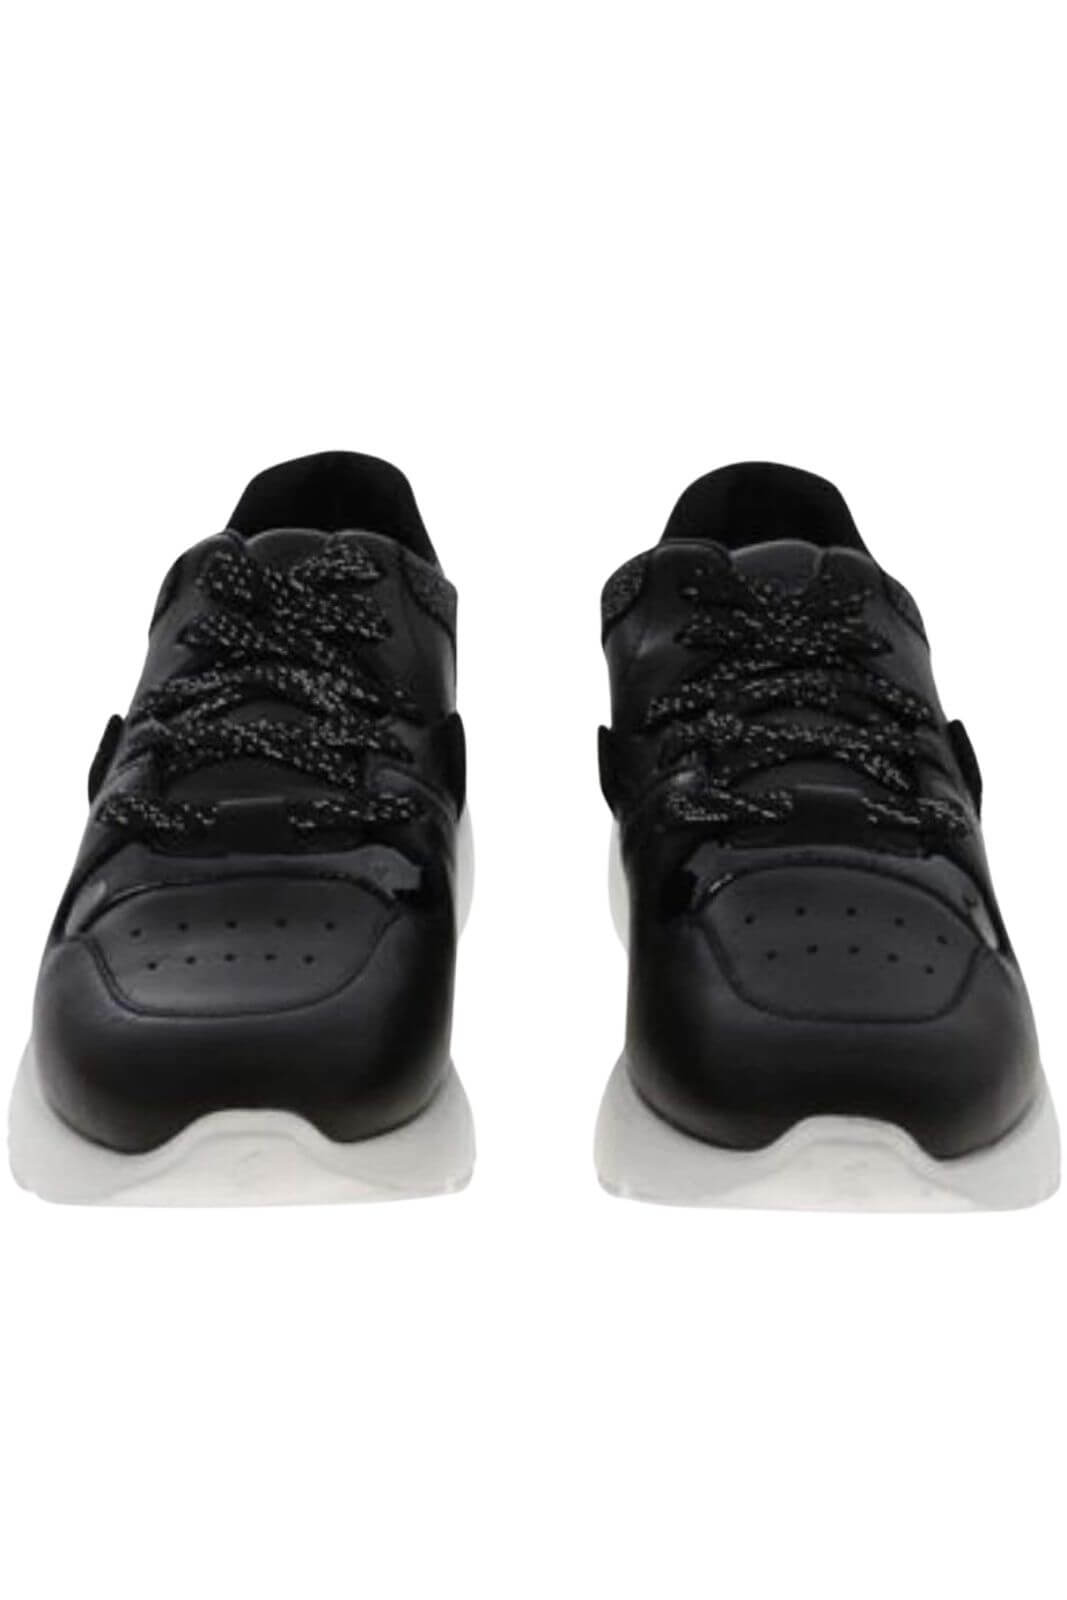 Hogan Sneakers Donna H385 SPORT STYLE